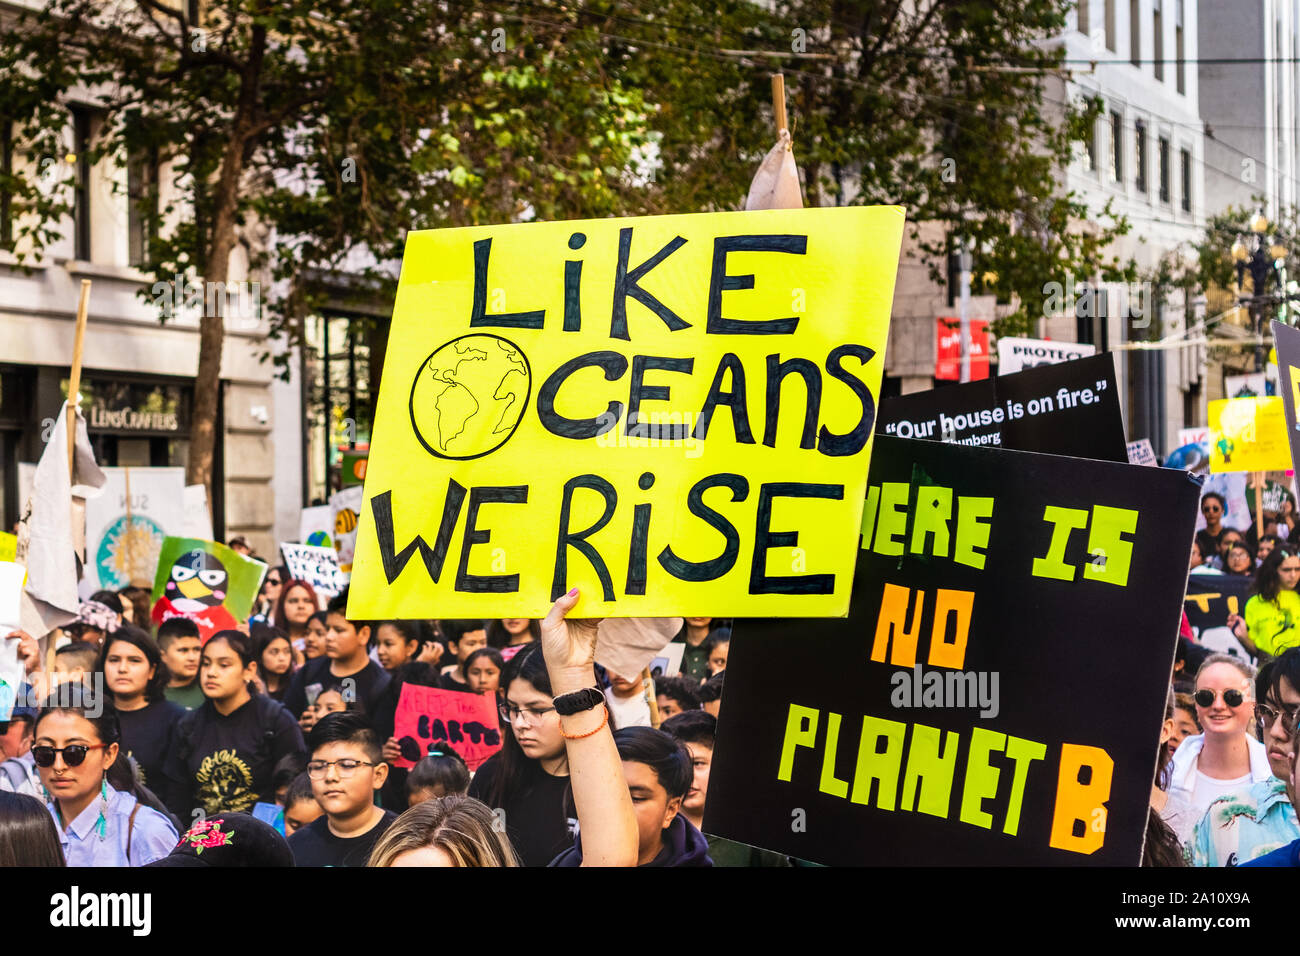 Sep 20, 2019 San Francisco / CA / USA - Like Oceans We Rise placard raised at the Global Youth Climate Strike Rally and March in downtown San Francisc Stock Photo